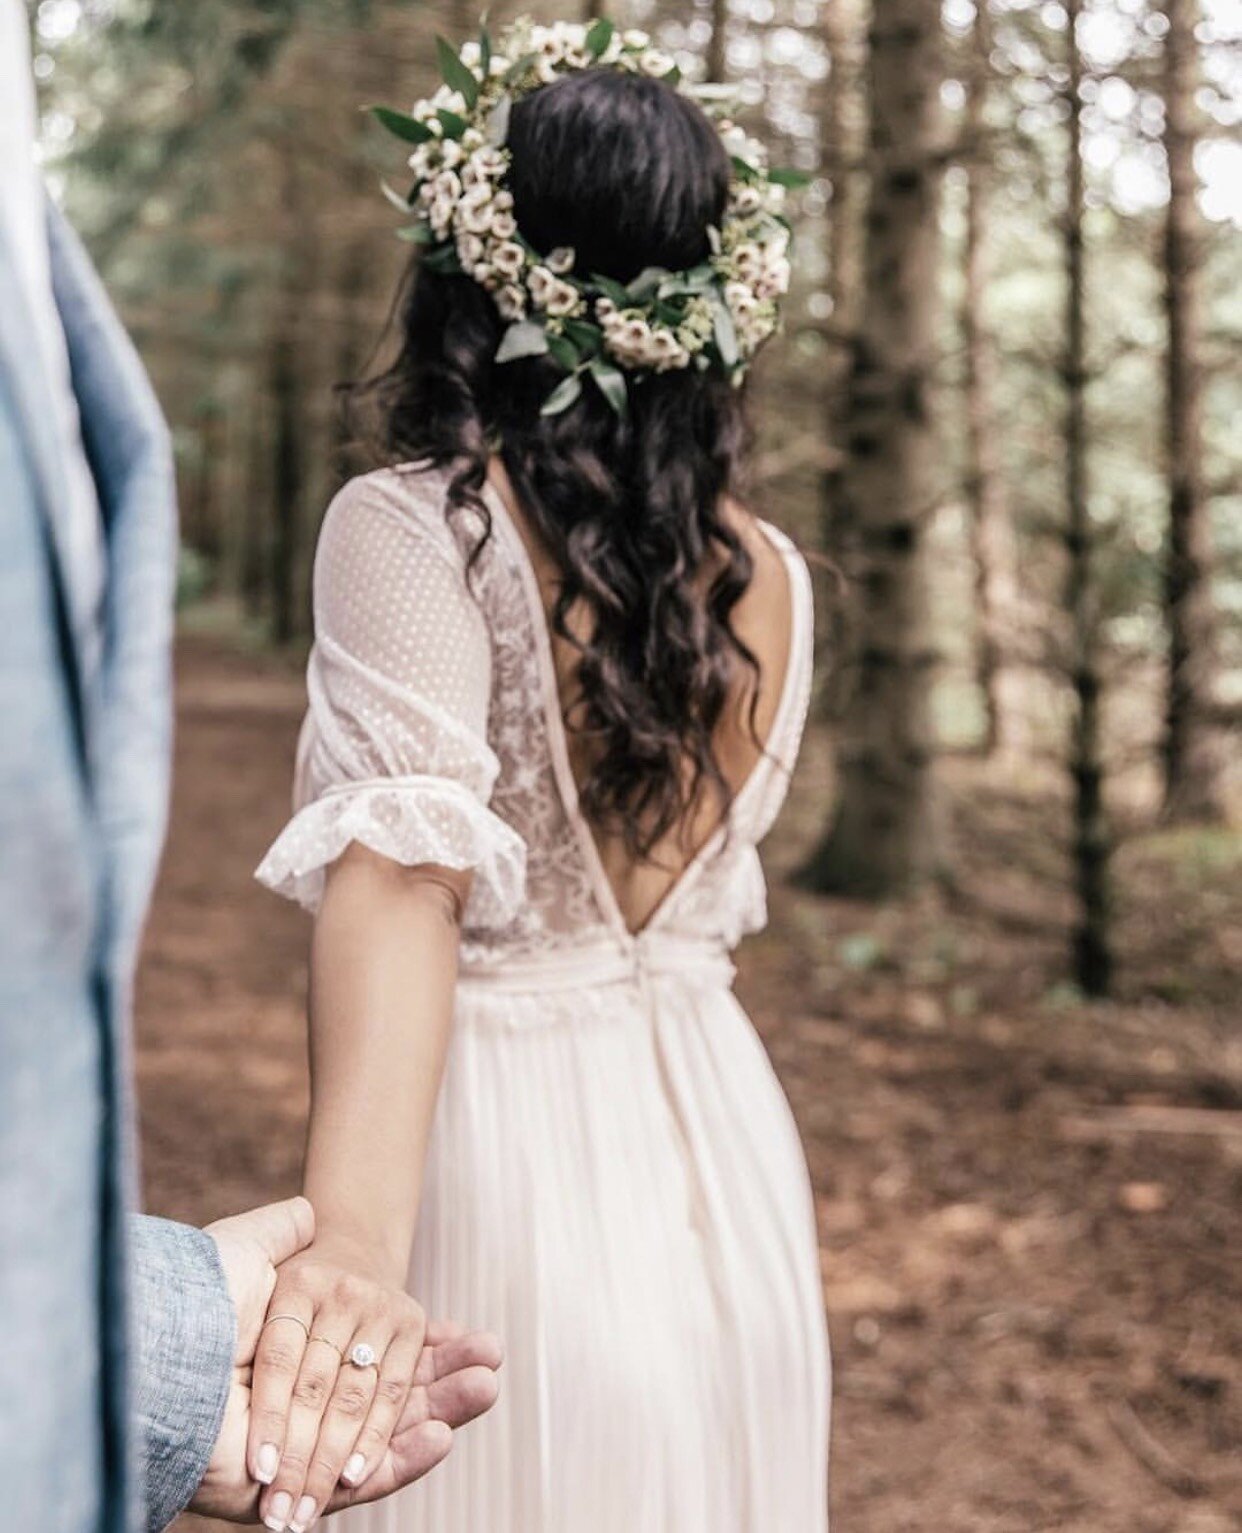 Top Off Your Unique Wedding with A Flower Crown for Every Bride